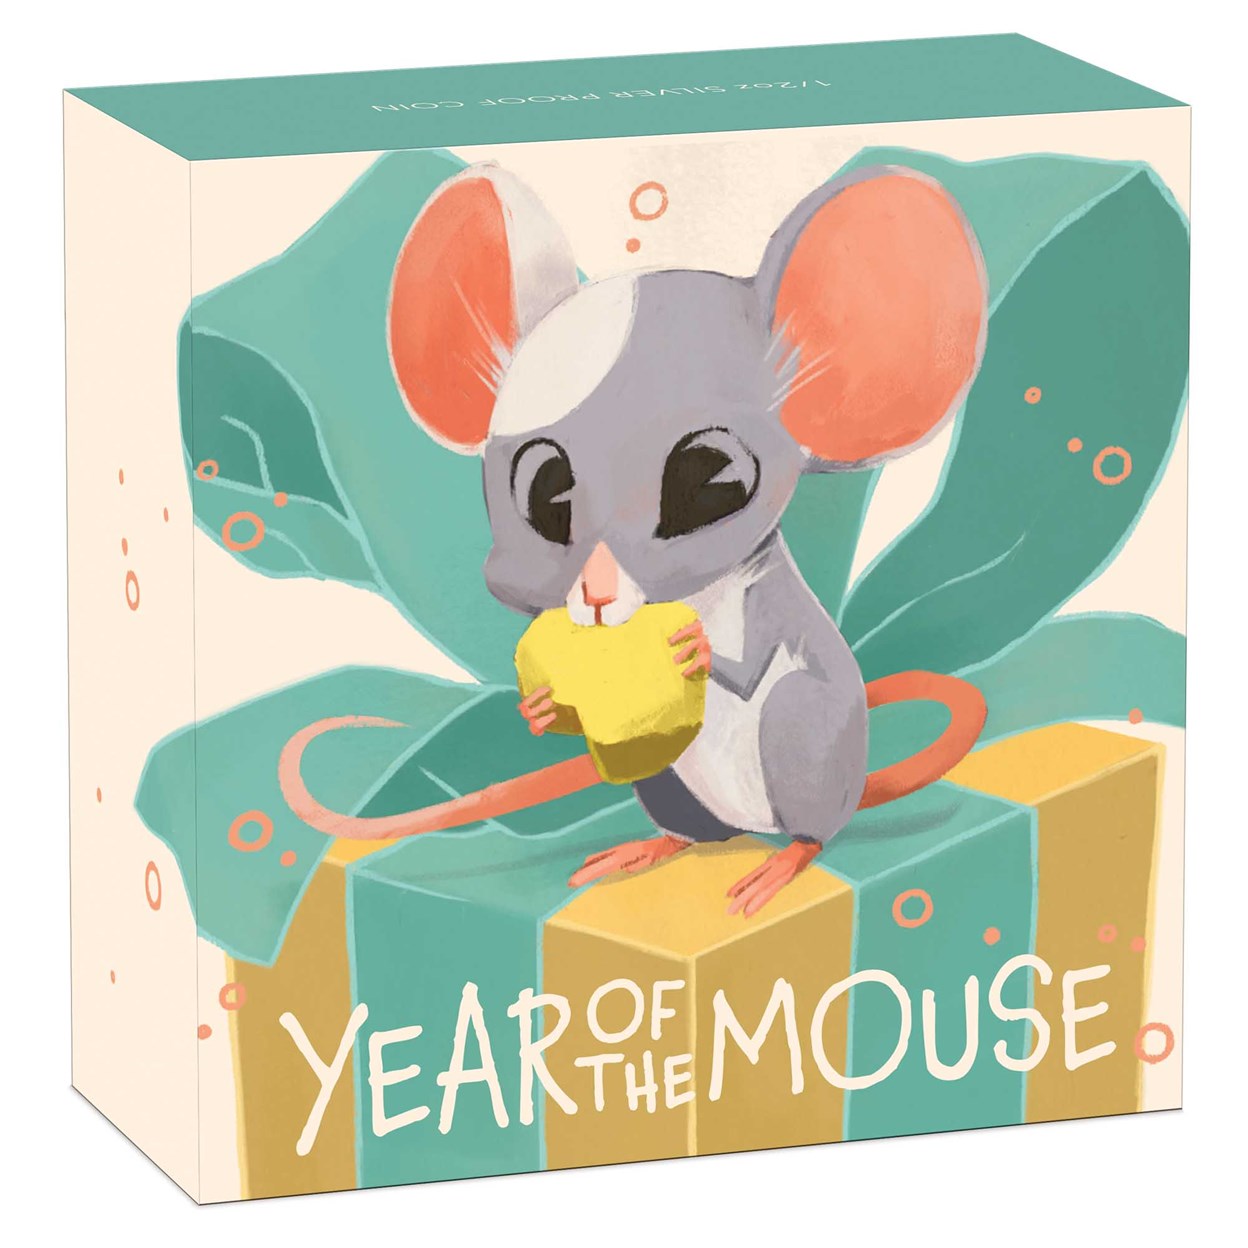 05 baby mouse 2019 1 2oz silver proof InShipper